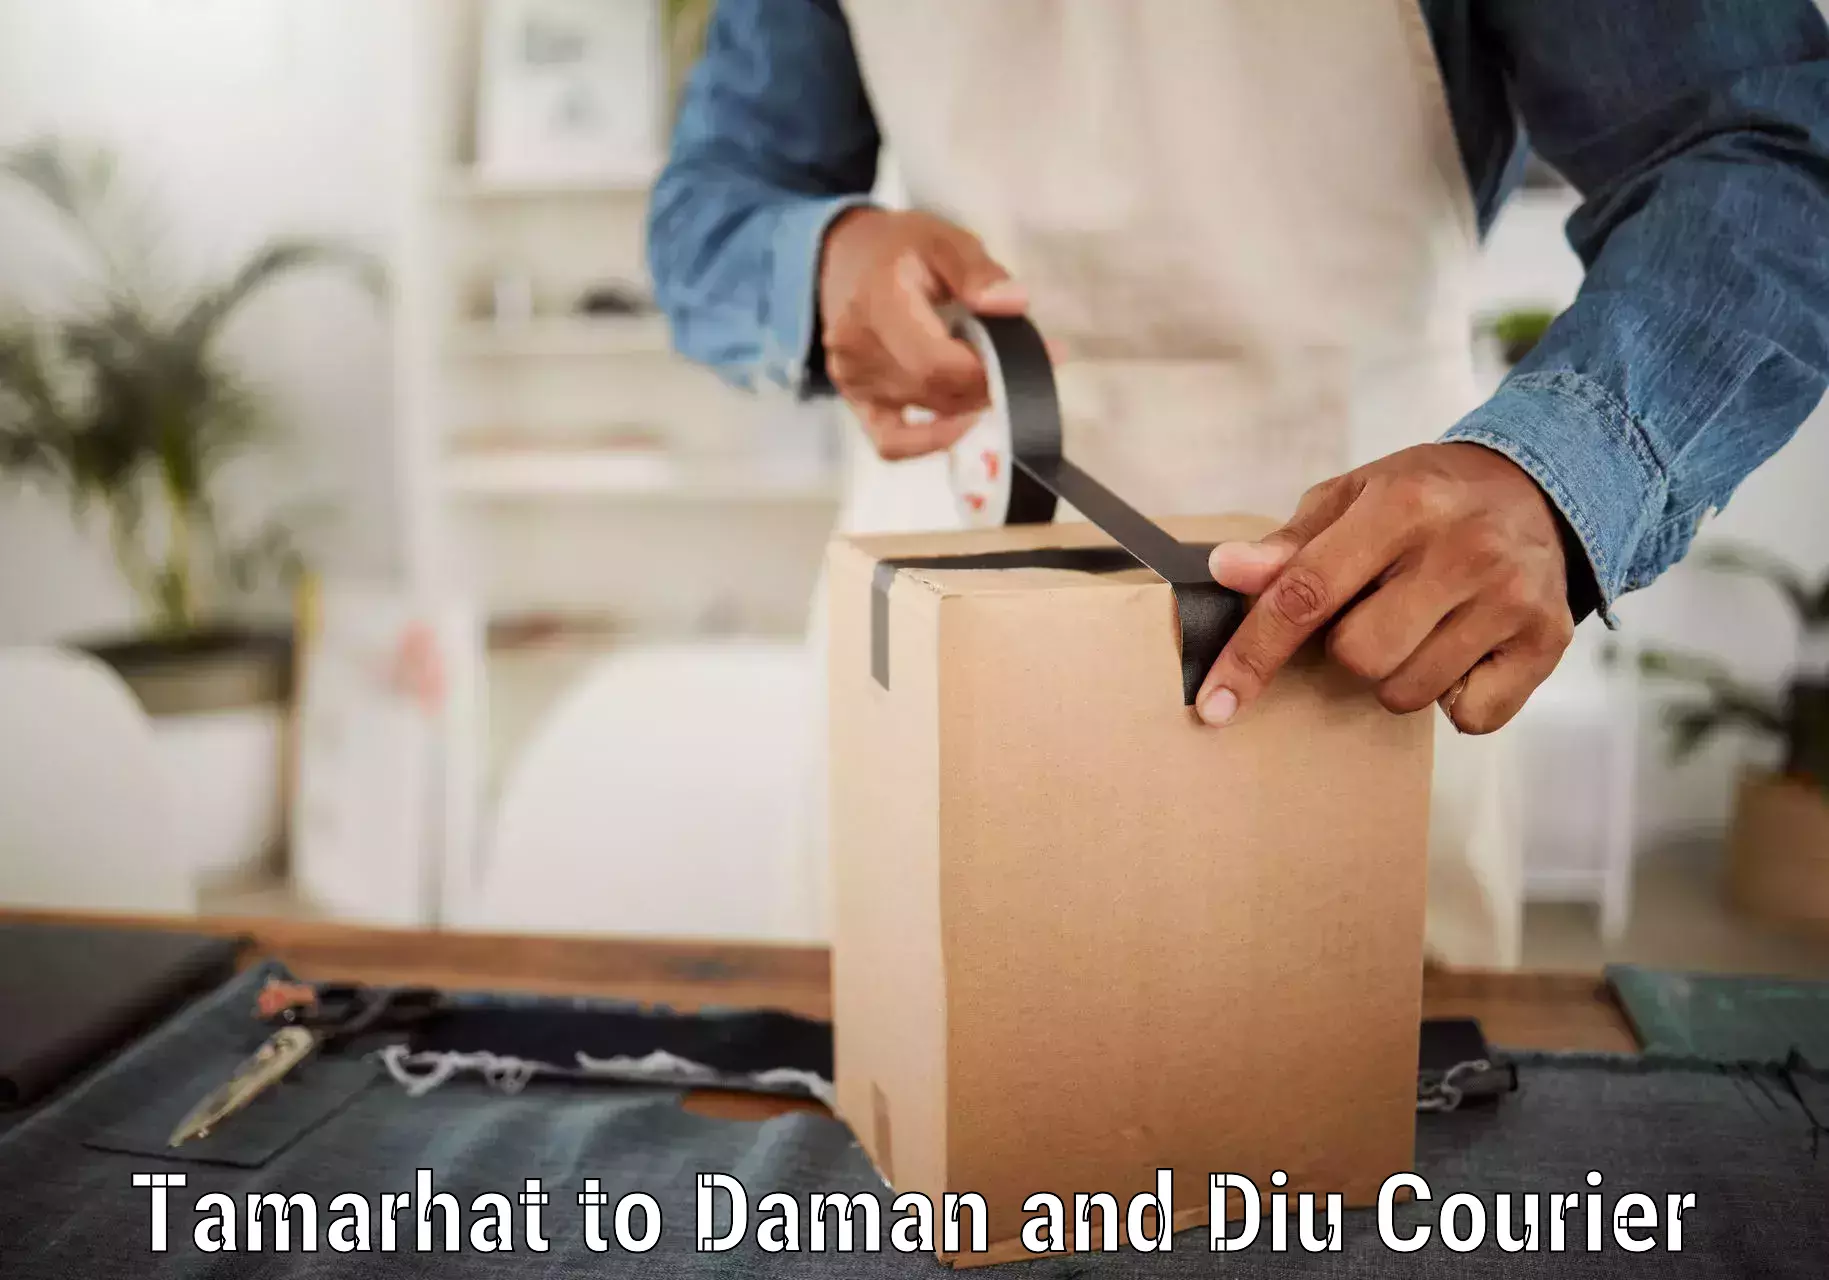 Advanced tracking systems Tamarhat to Diu